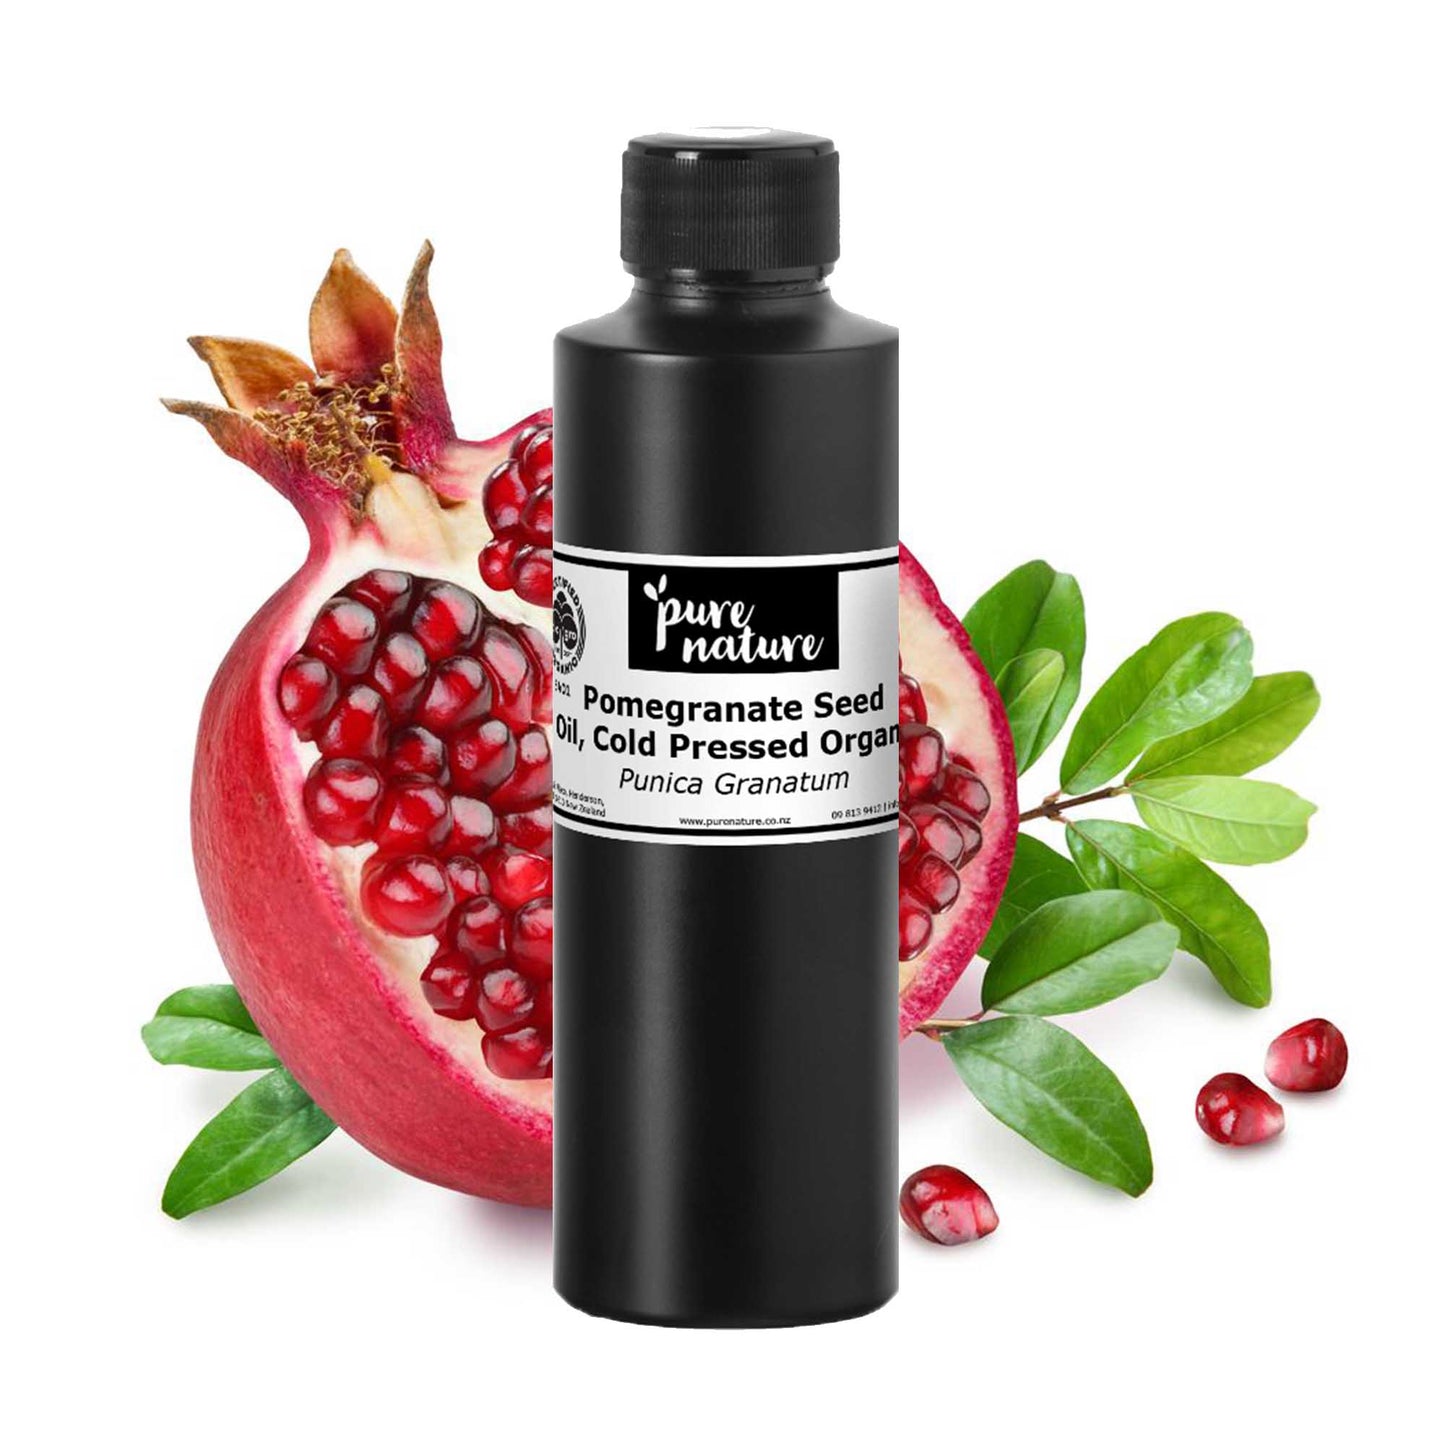 Pomegranate Seed Oil, Cold Pressed - Organic